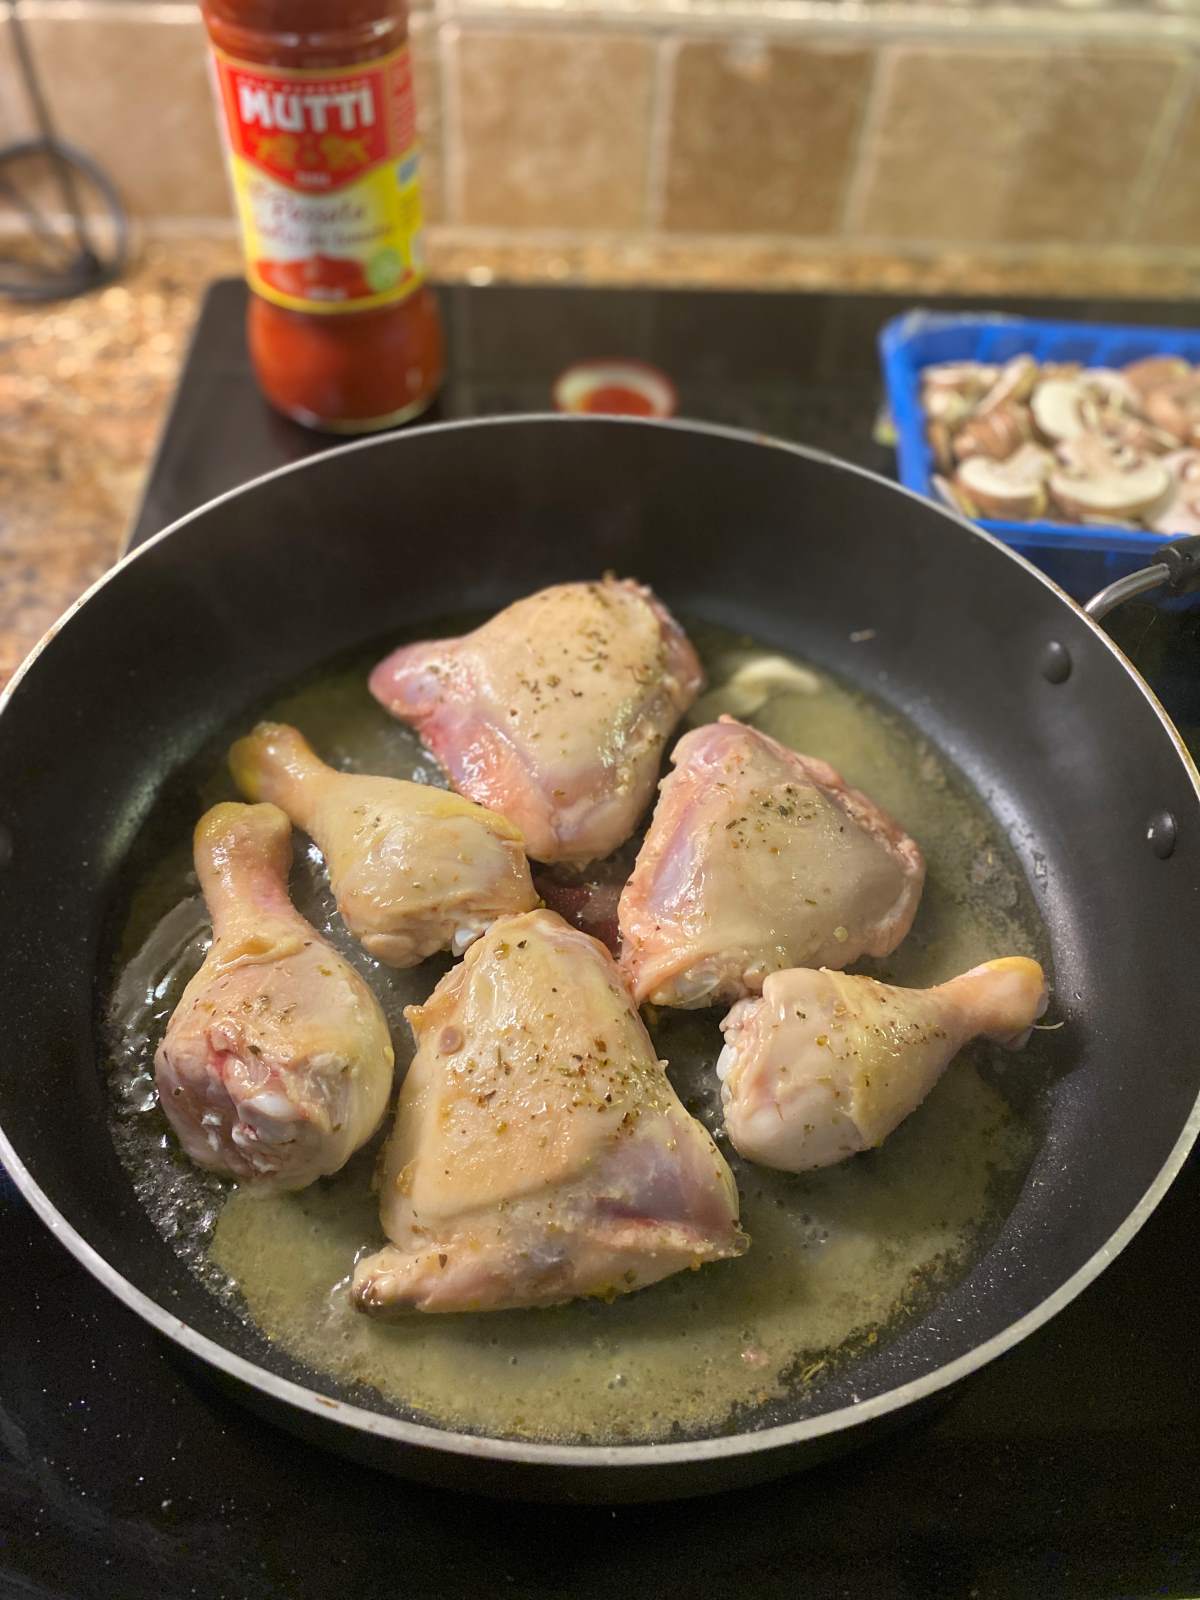 Chicken legs and thighs in a skillet frying